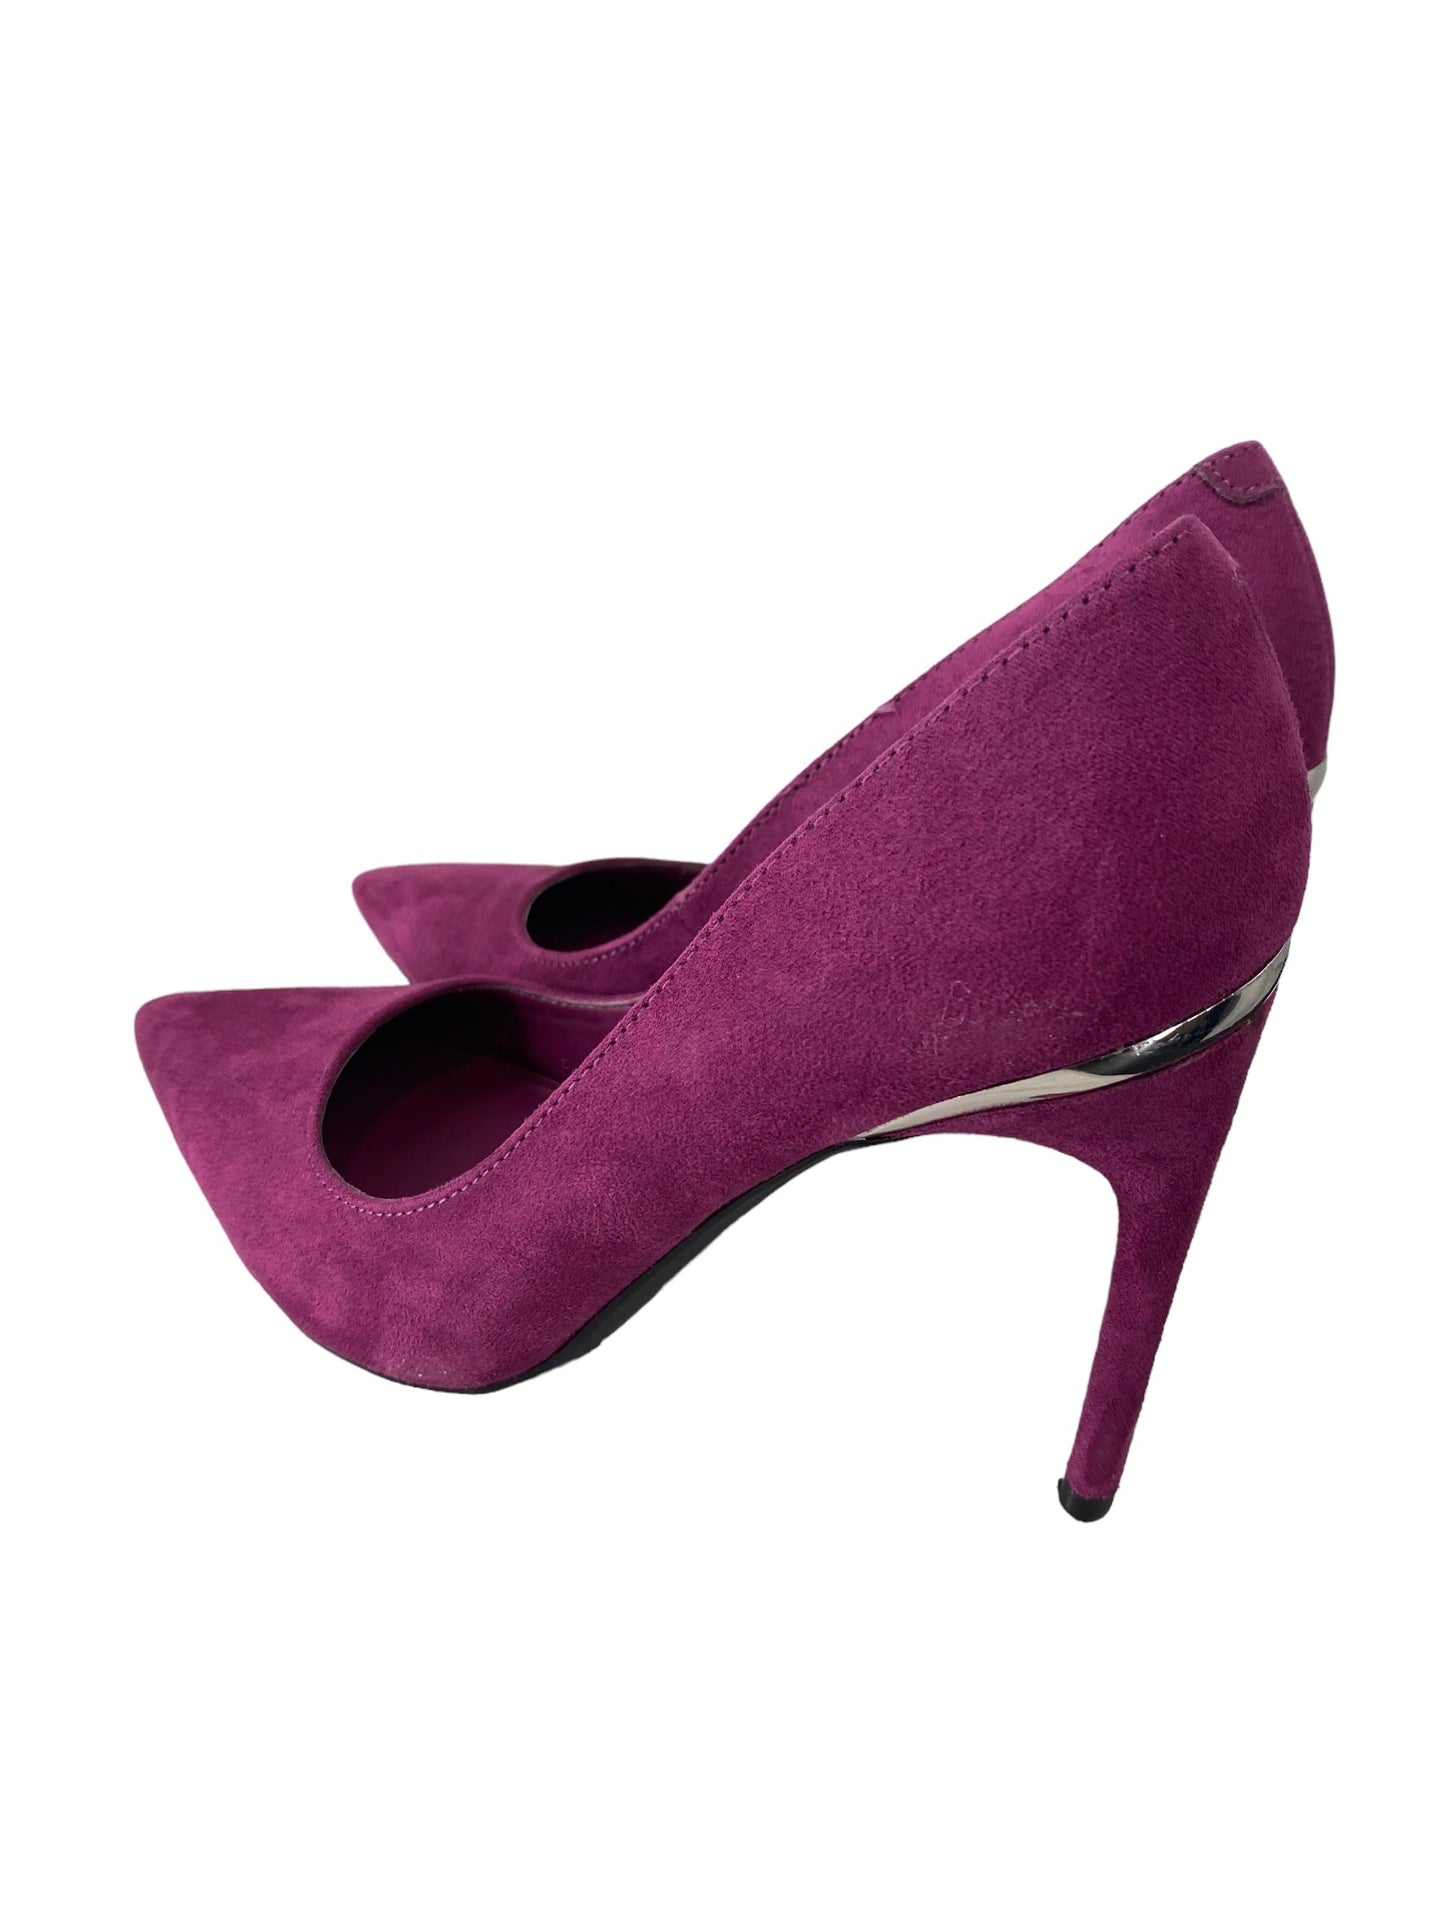 Shoes Heels Stiletto By Marc Fisher  Size: 5.5